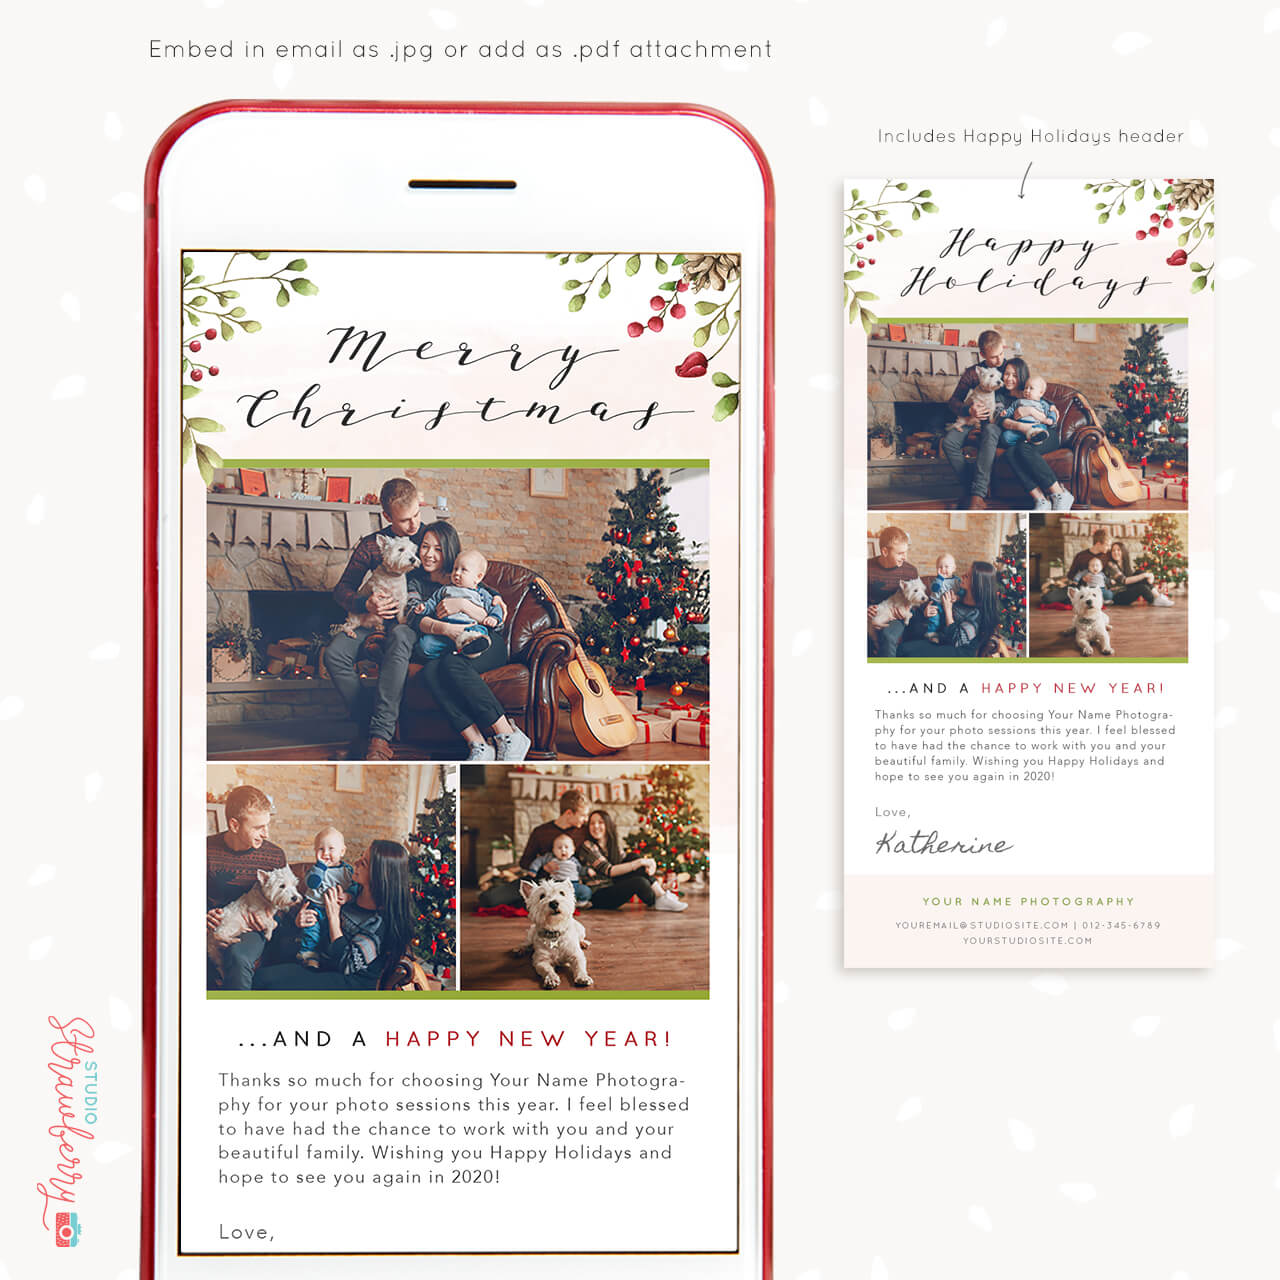 Merry Christmas email newsletter template for photographers